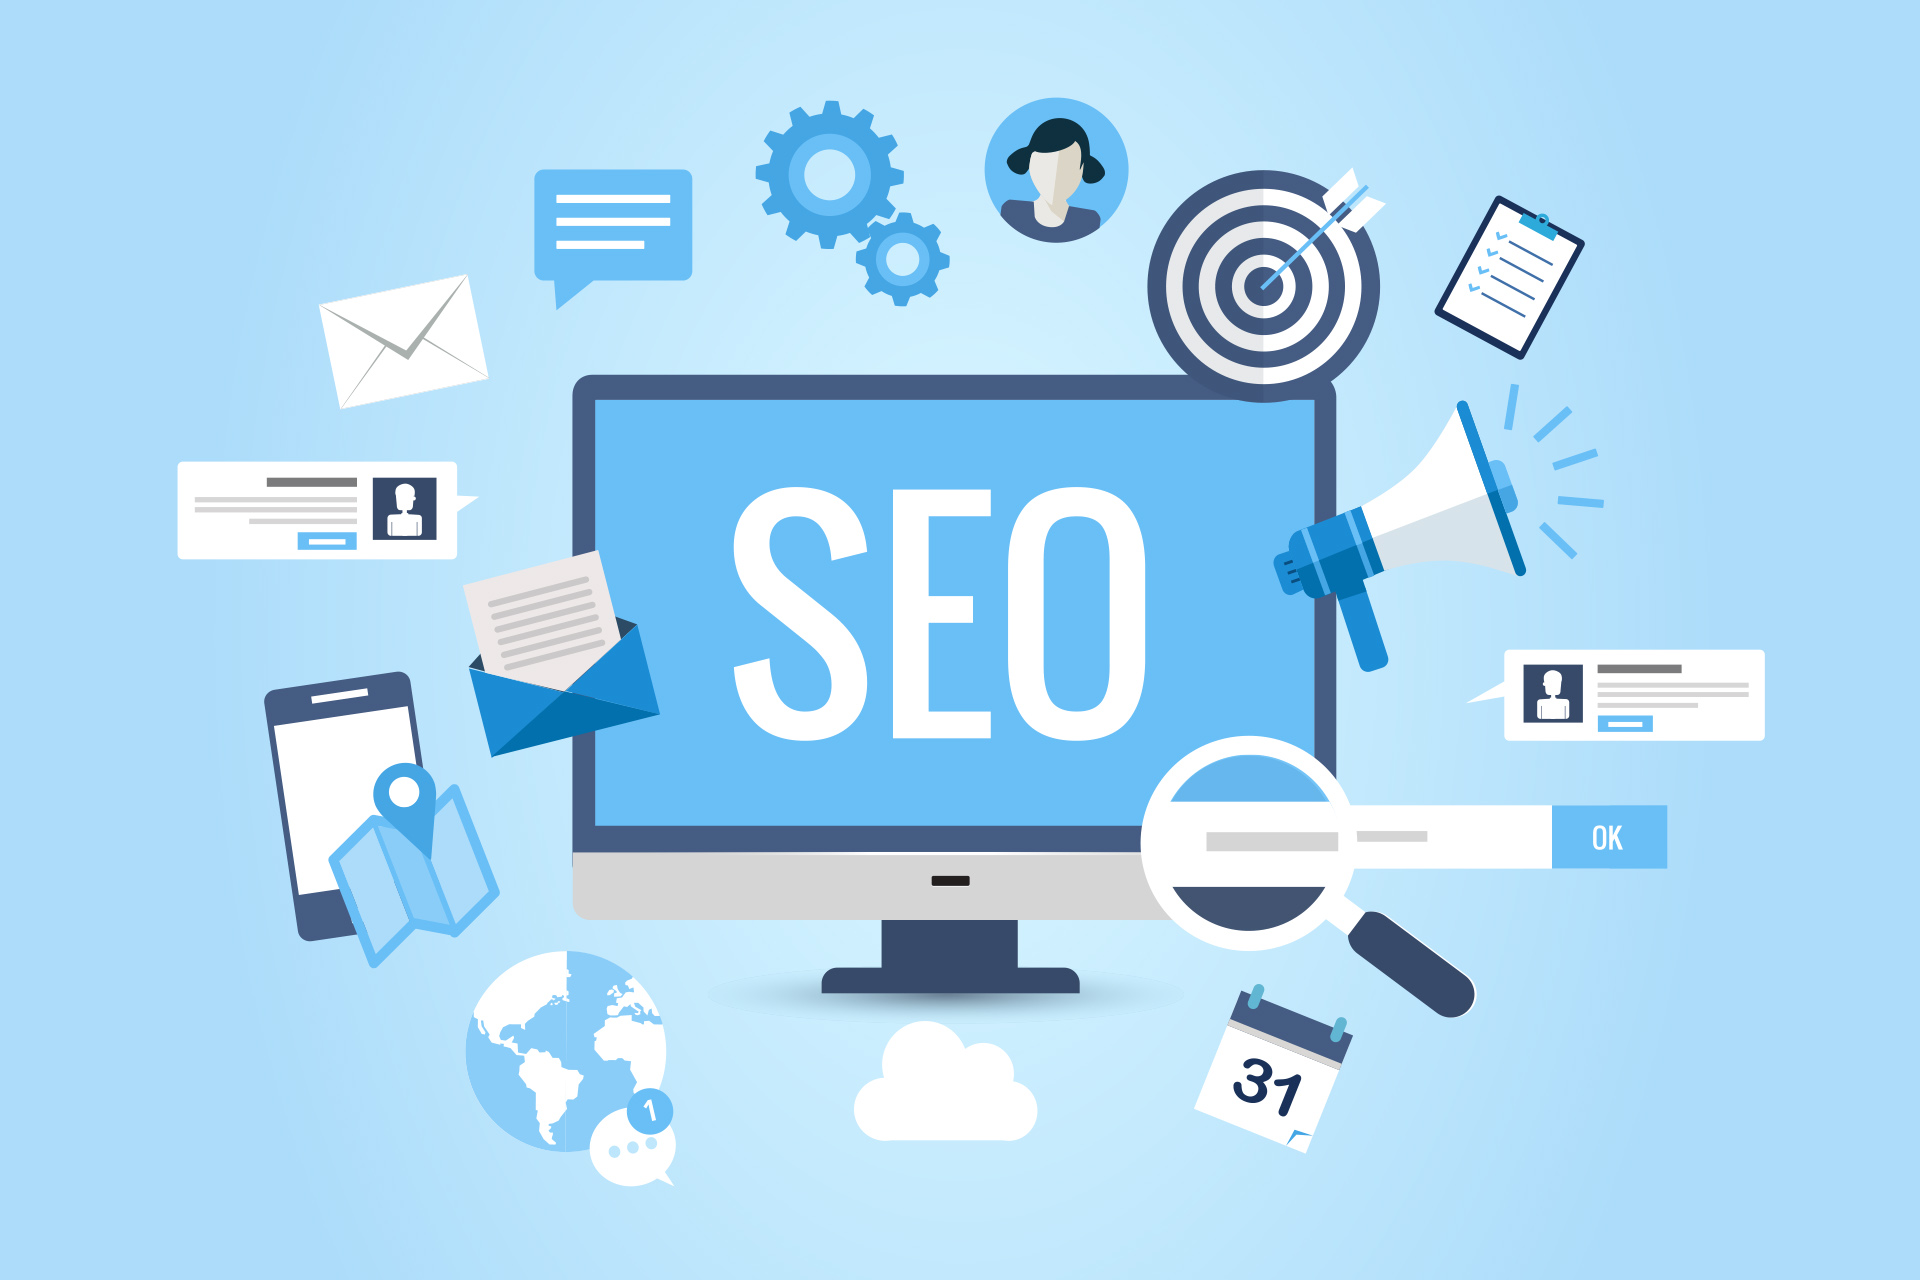 How Does SEO Affect Your Business?